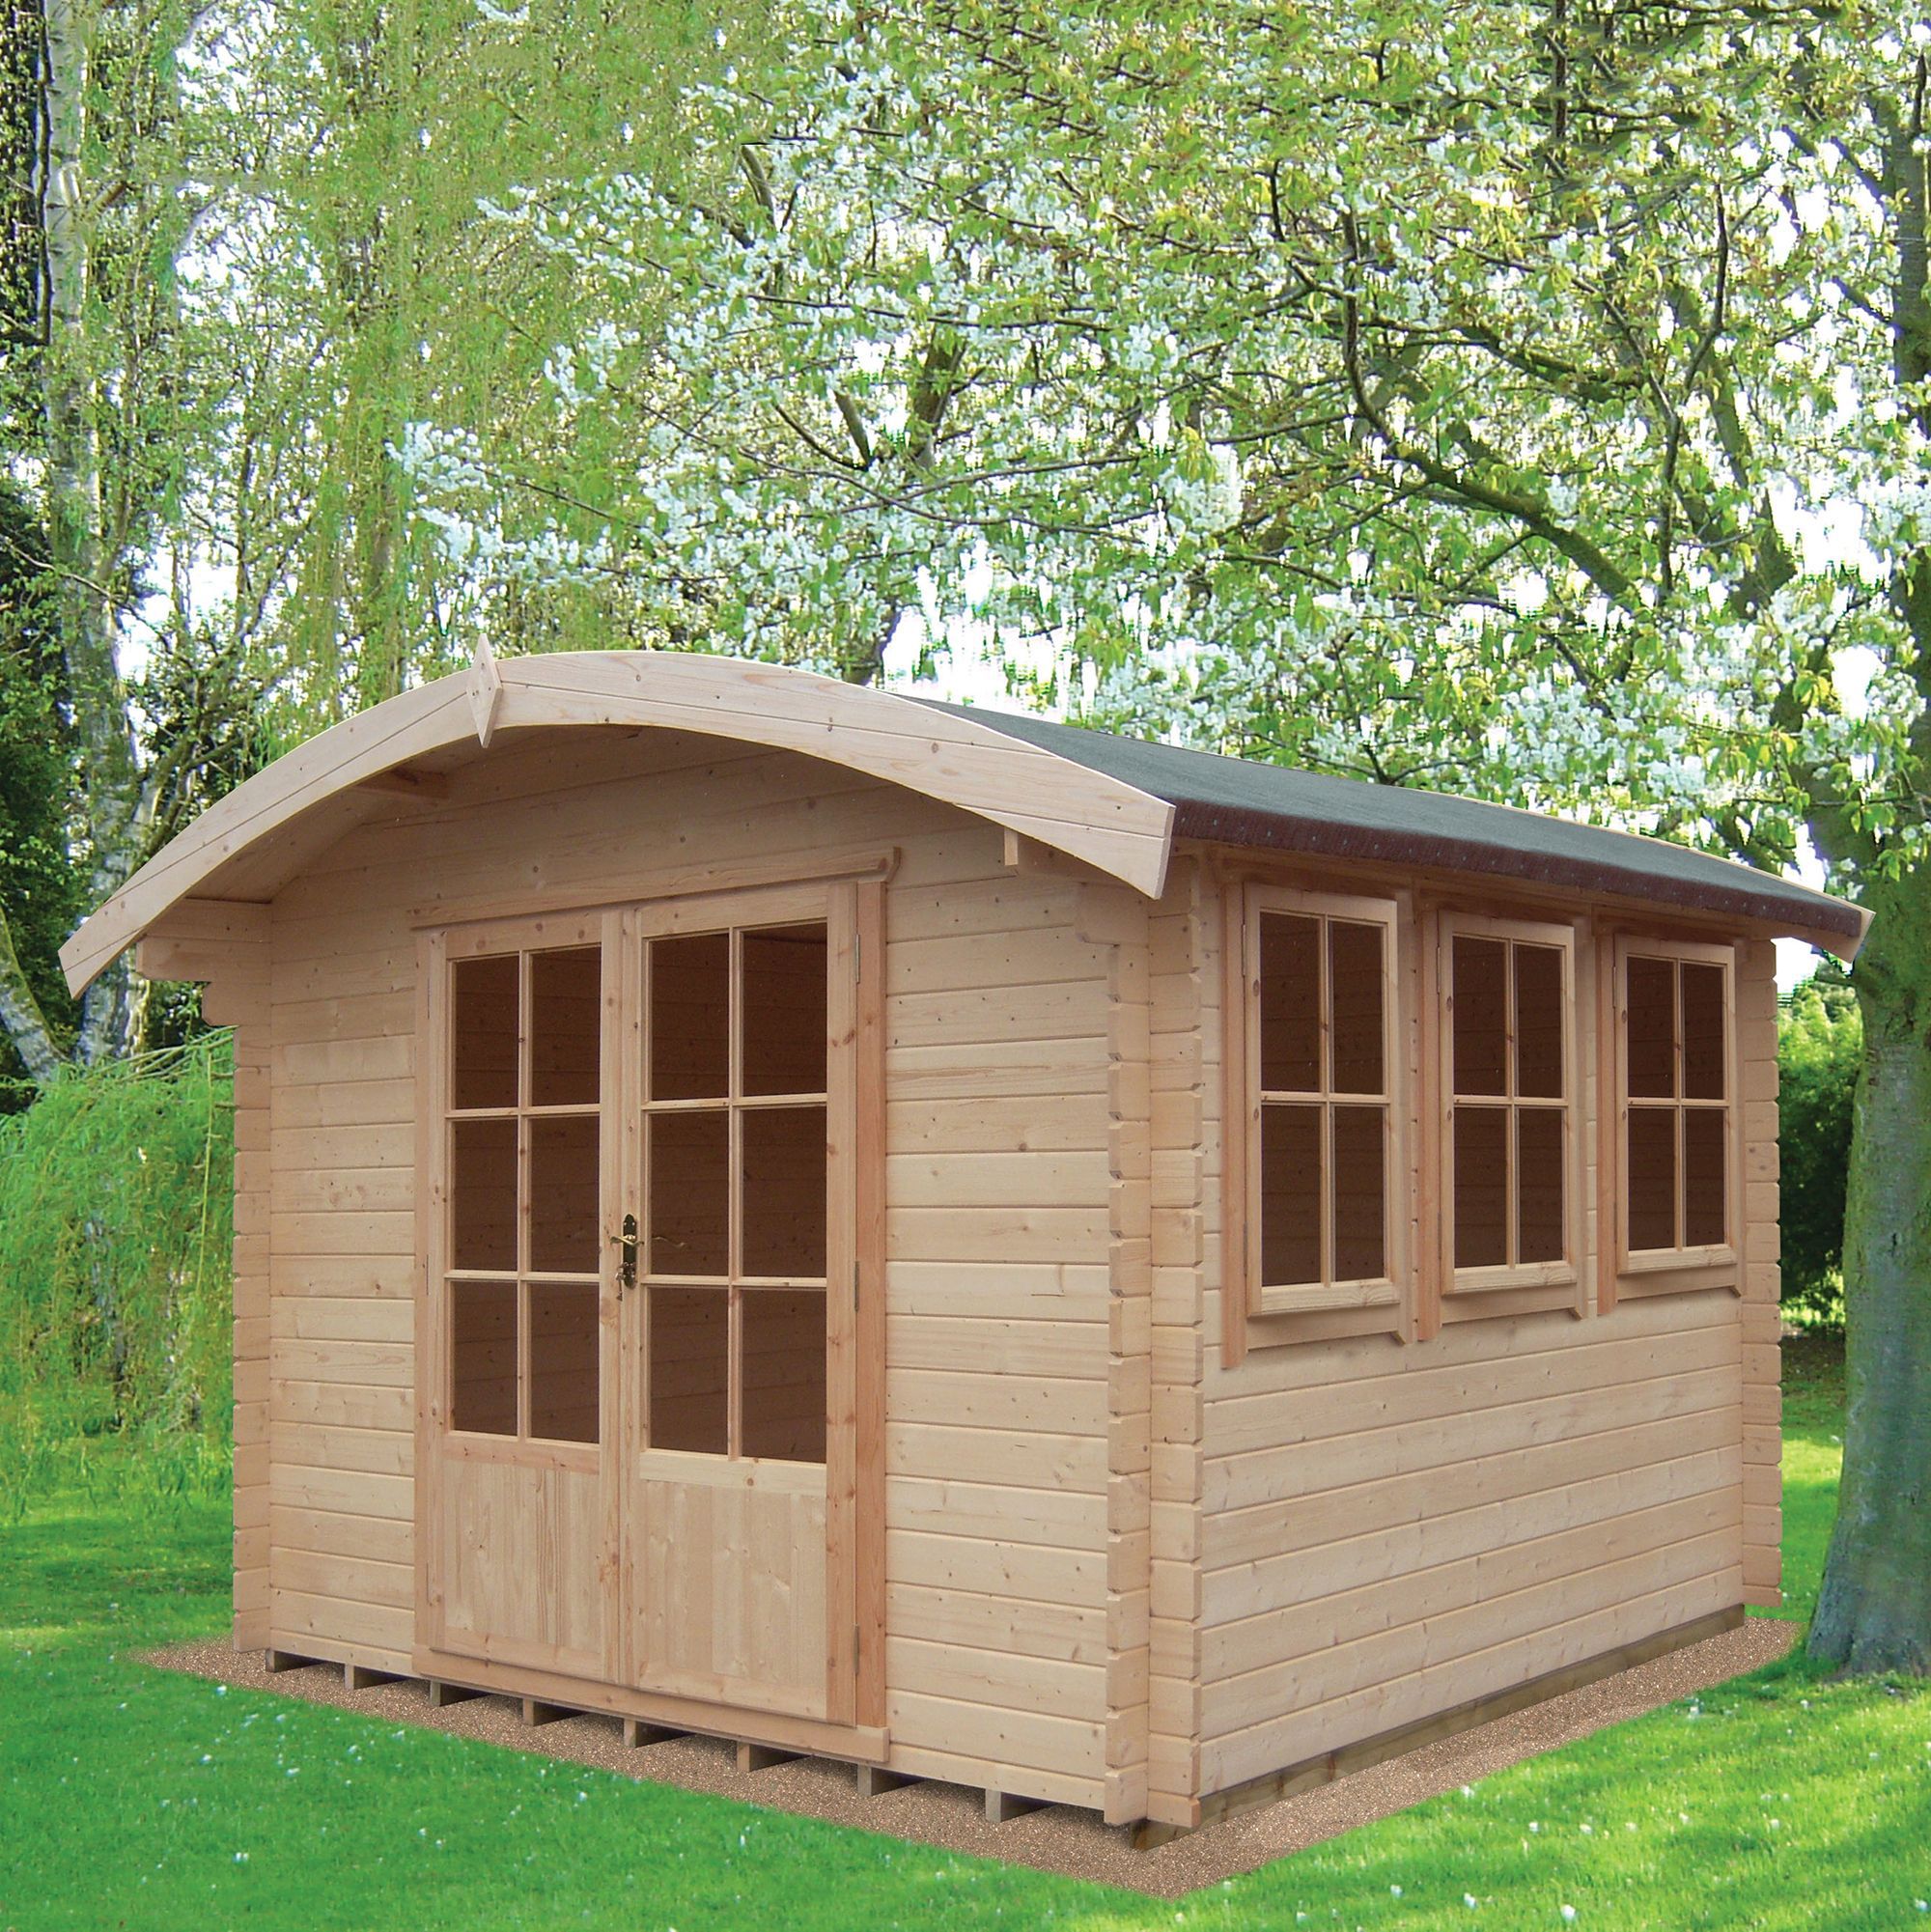 Shire Kilburn 10x14 ft Toughened glass & 3 windows Curved Wooden Cabin - Assembly service included